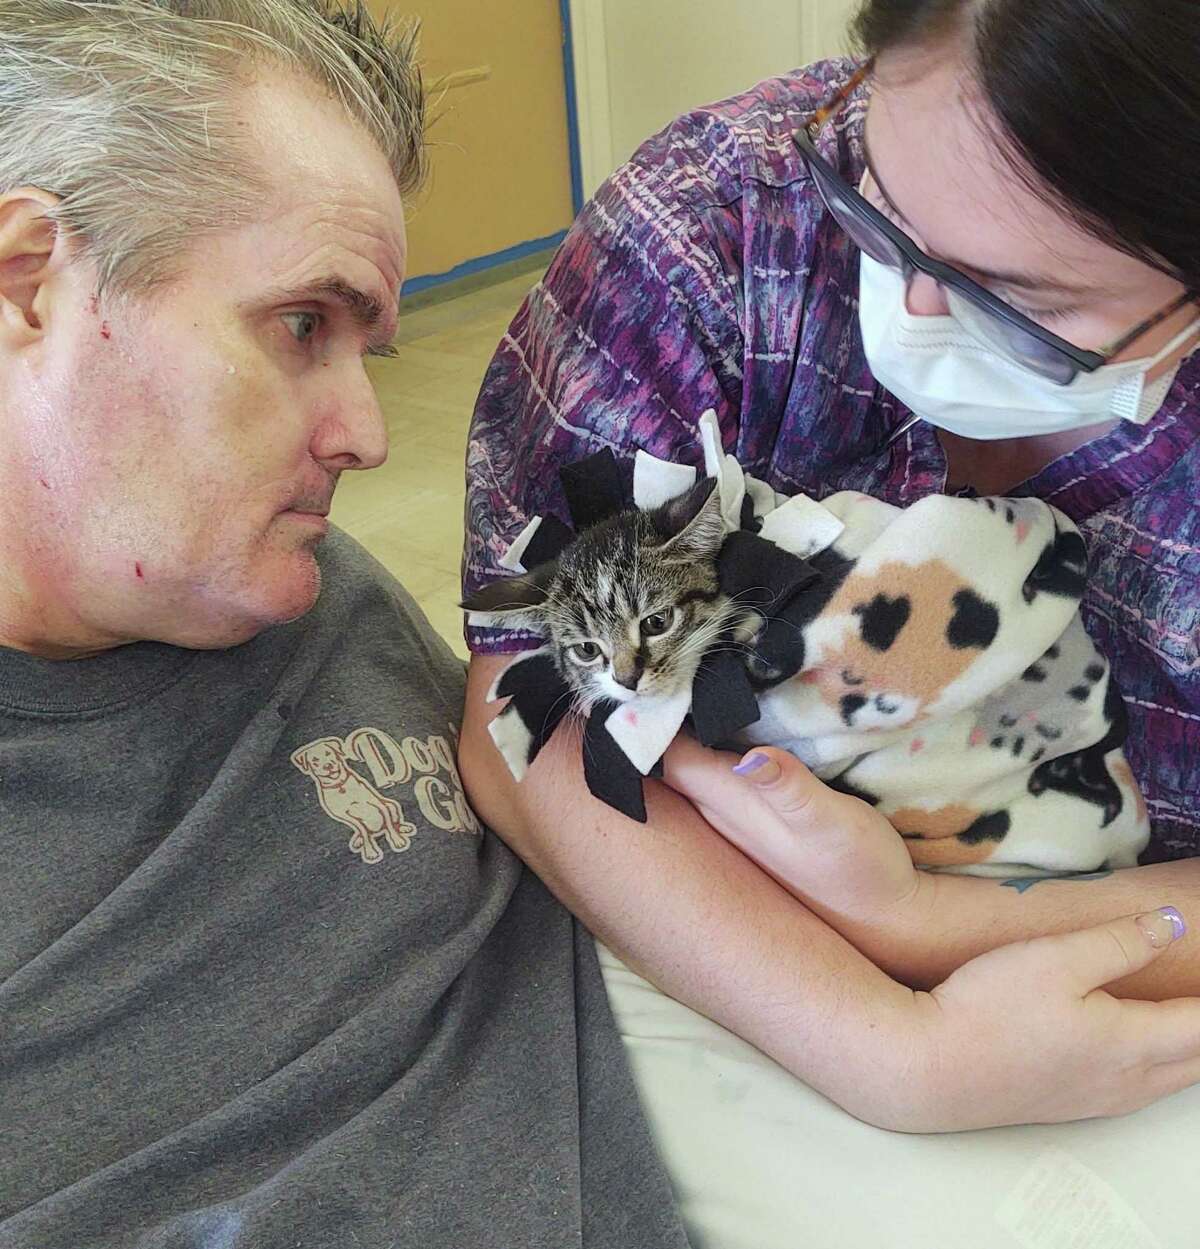 Eight rescue kittens from Westchester-based Rock ‘n Rescue visited residents at New Milford’s Village Crest Center for Health and Rehabilitation. At Village Crest Certified Nursing Assistant Catherine Peek presents Mike Dion with a cuddly kitten.